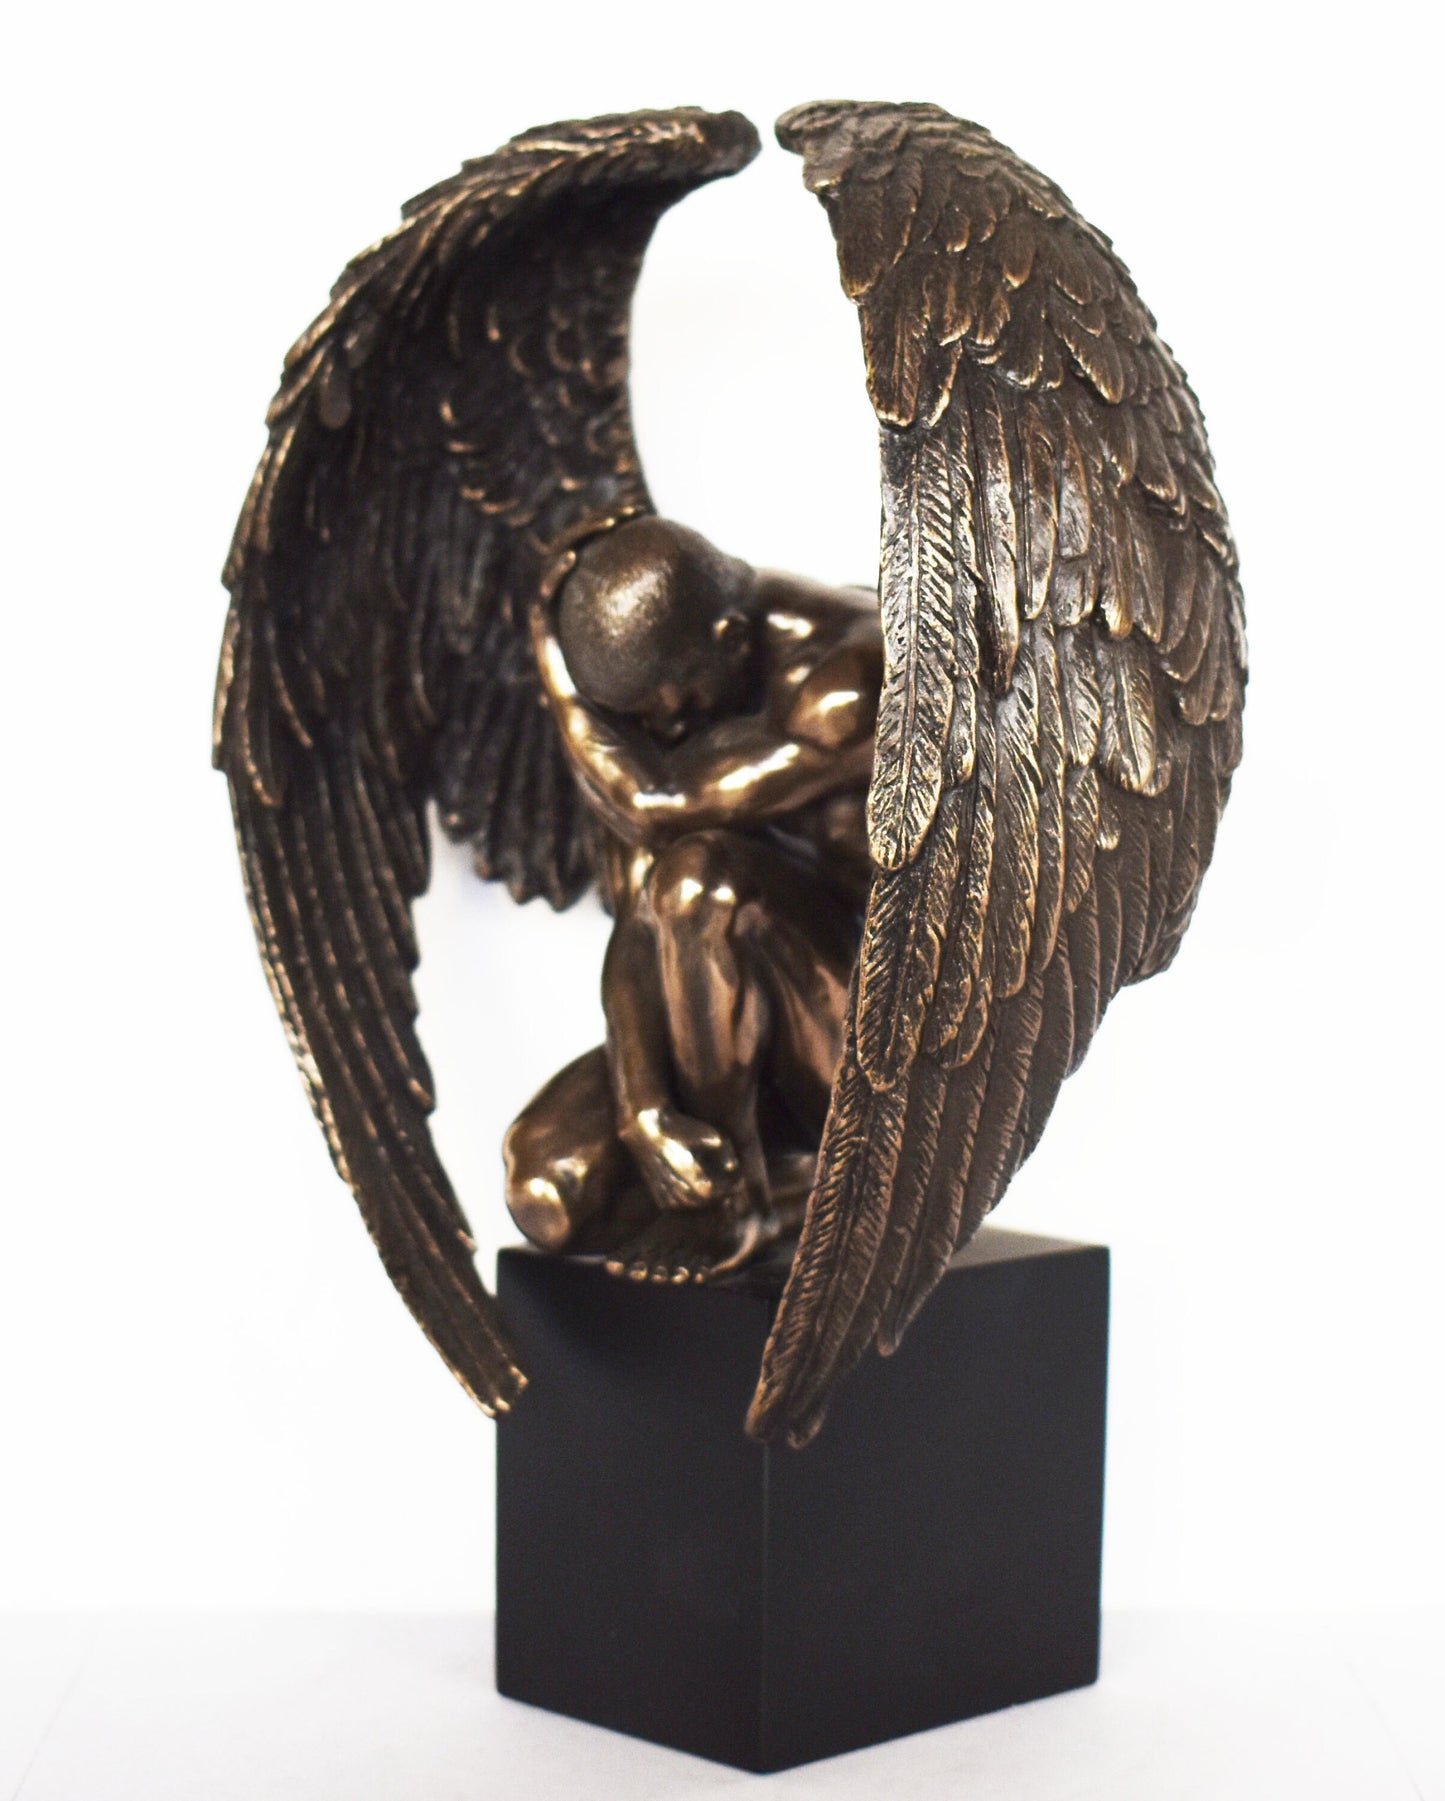 Fallen Angel - Cast Out of Heaven or Sinned - Tempt Humans to Lawlessness - Cold Cast Bronze Resin